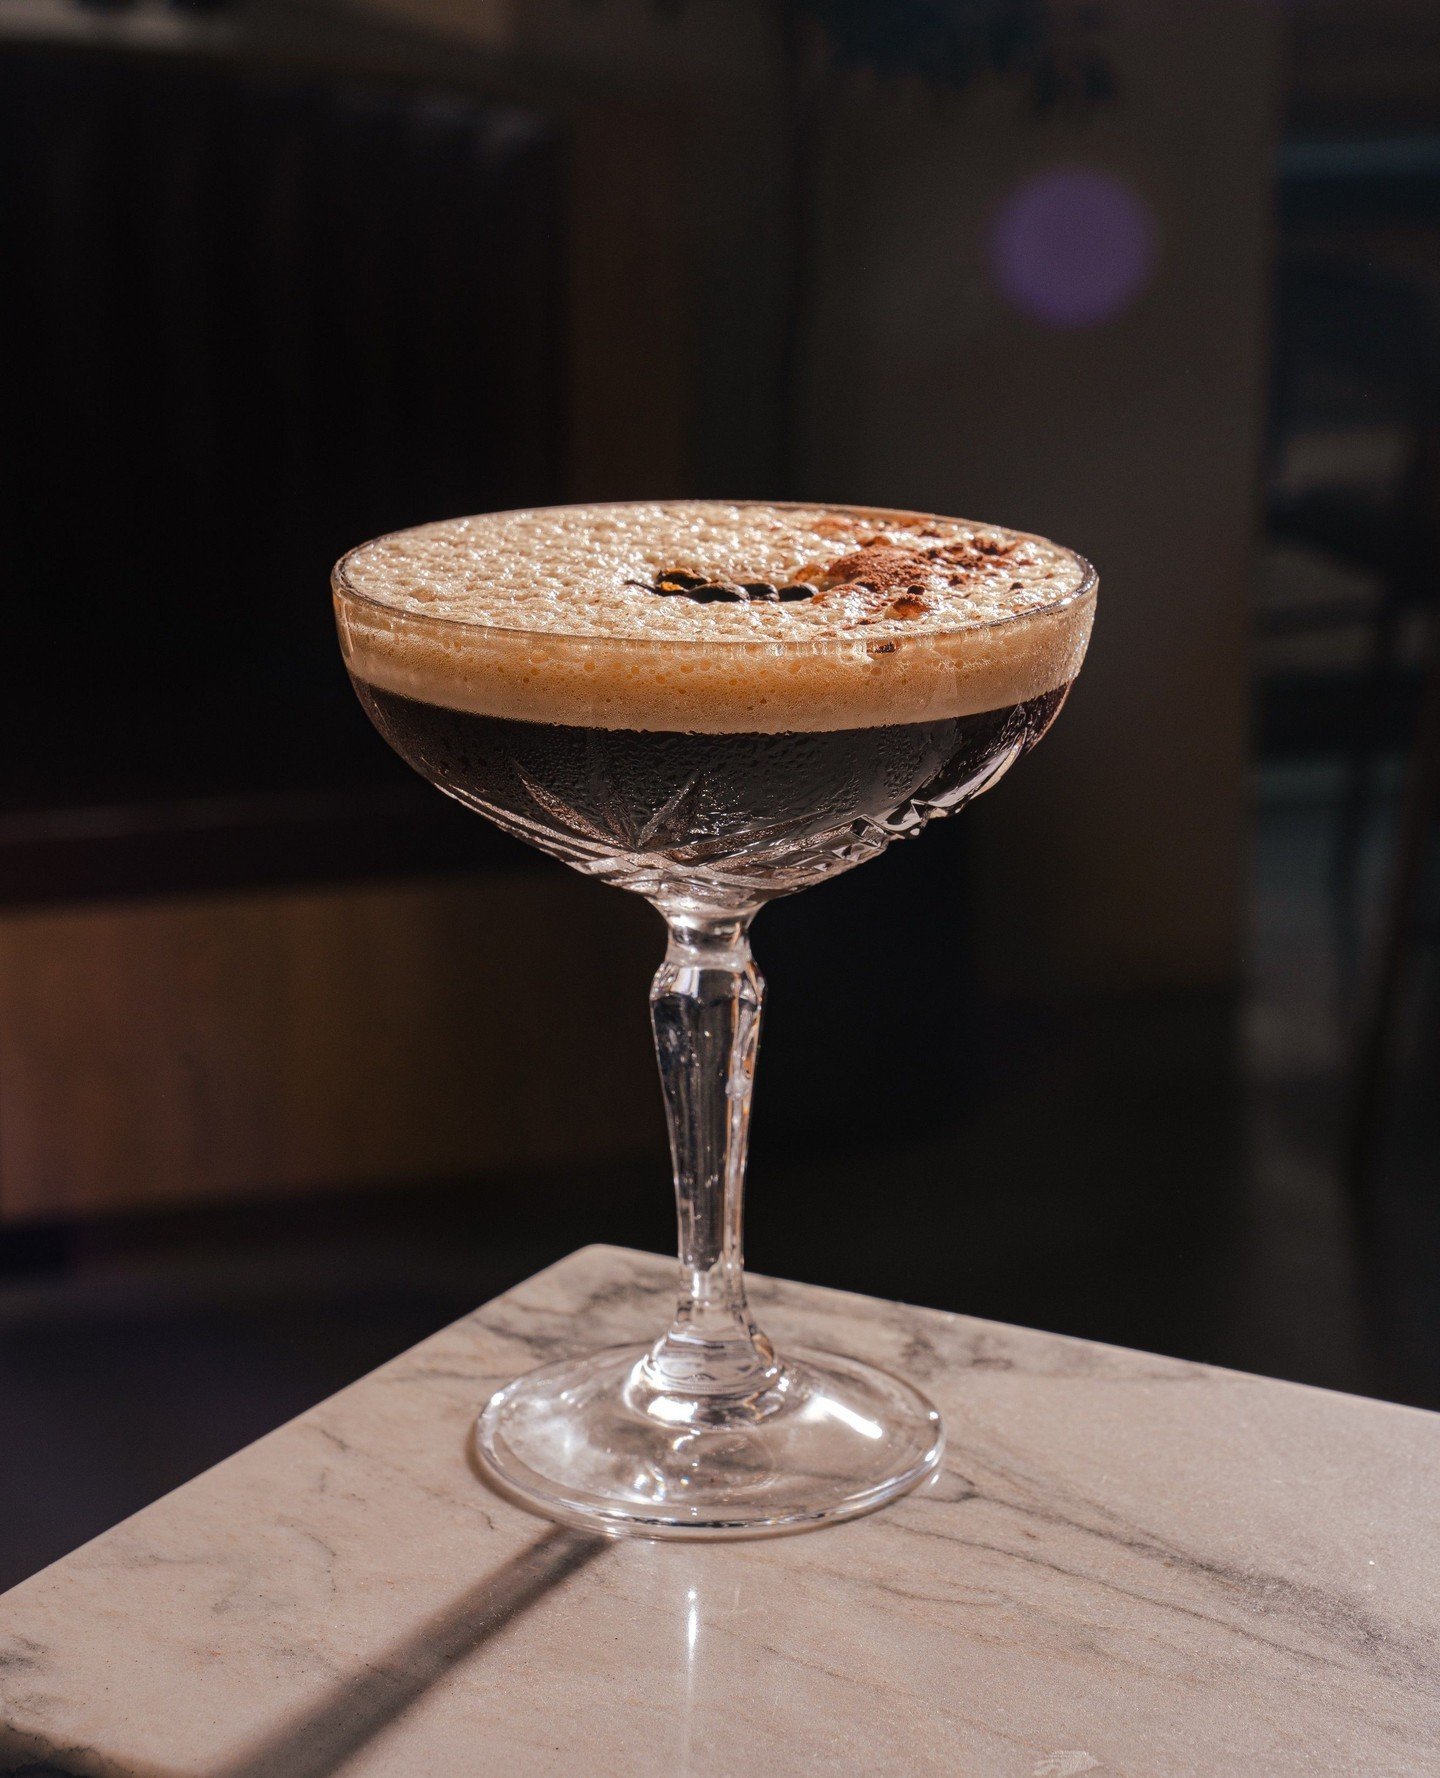 Are Fridays anything if you haven't had an espresso martini?⁠
⁠
Pick yourself up after the week, and cruise straight into the weekend ahead! ⁠
⁠
This is your time.